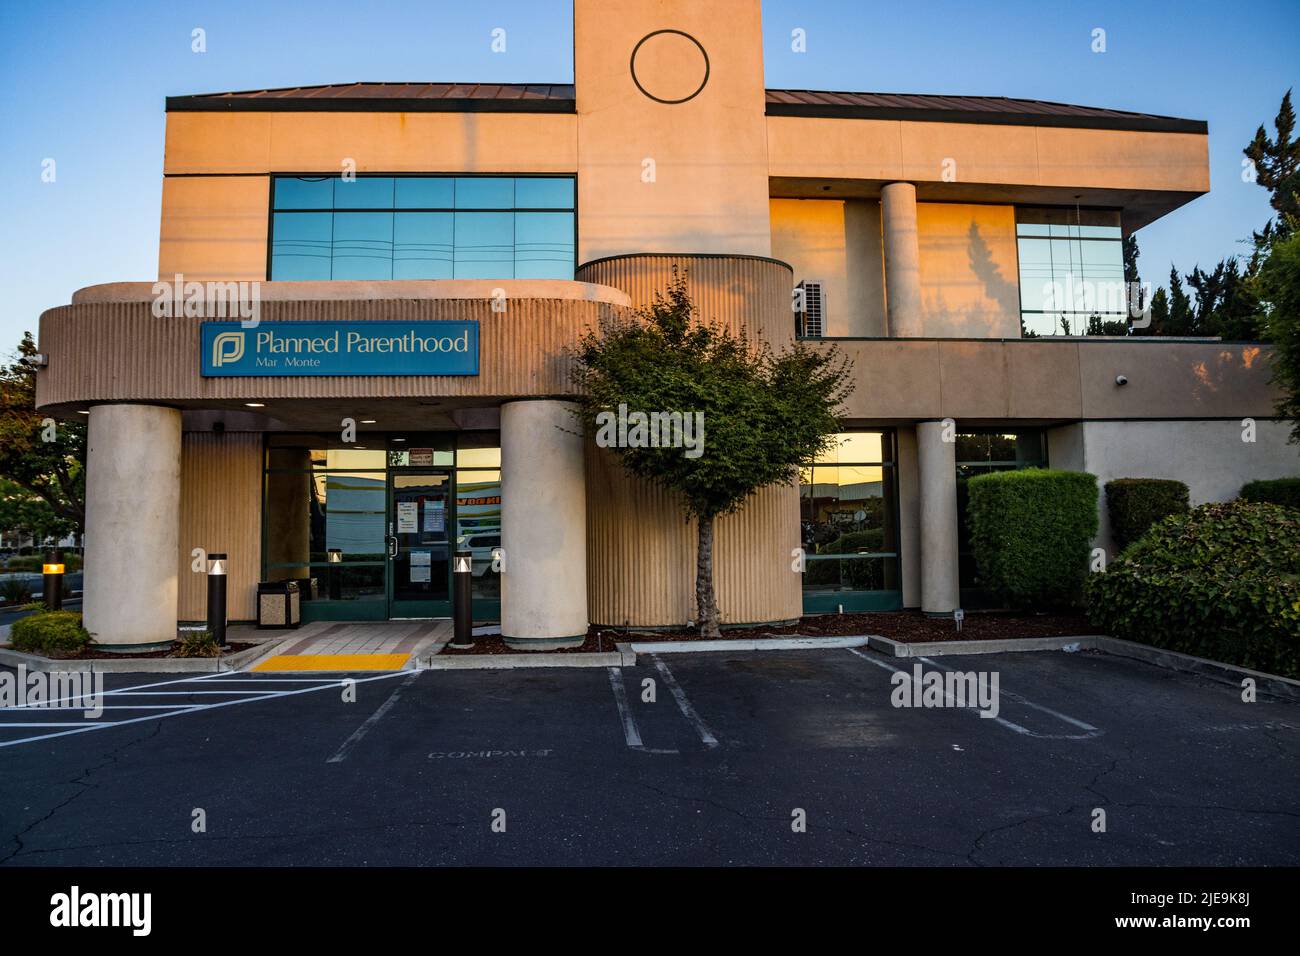 The Planned Parenthood facility in Modesto California Stock Photo